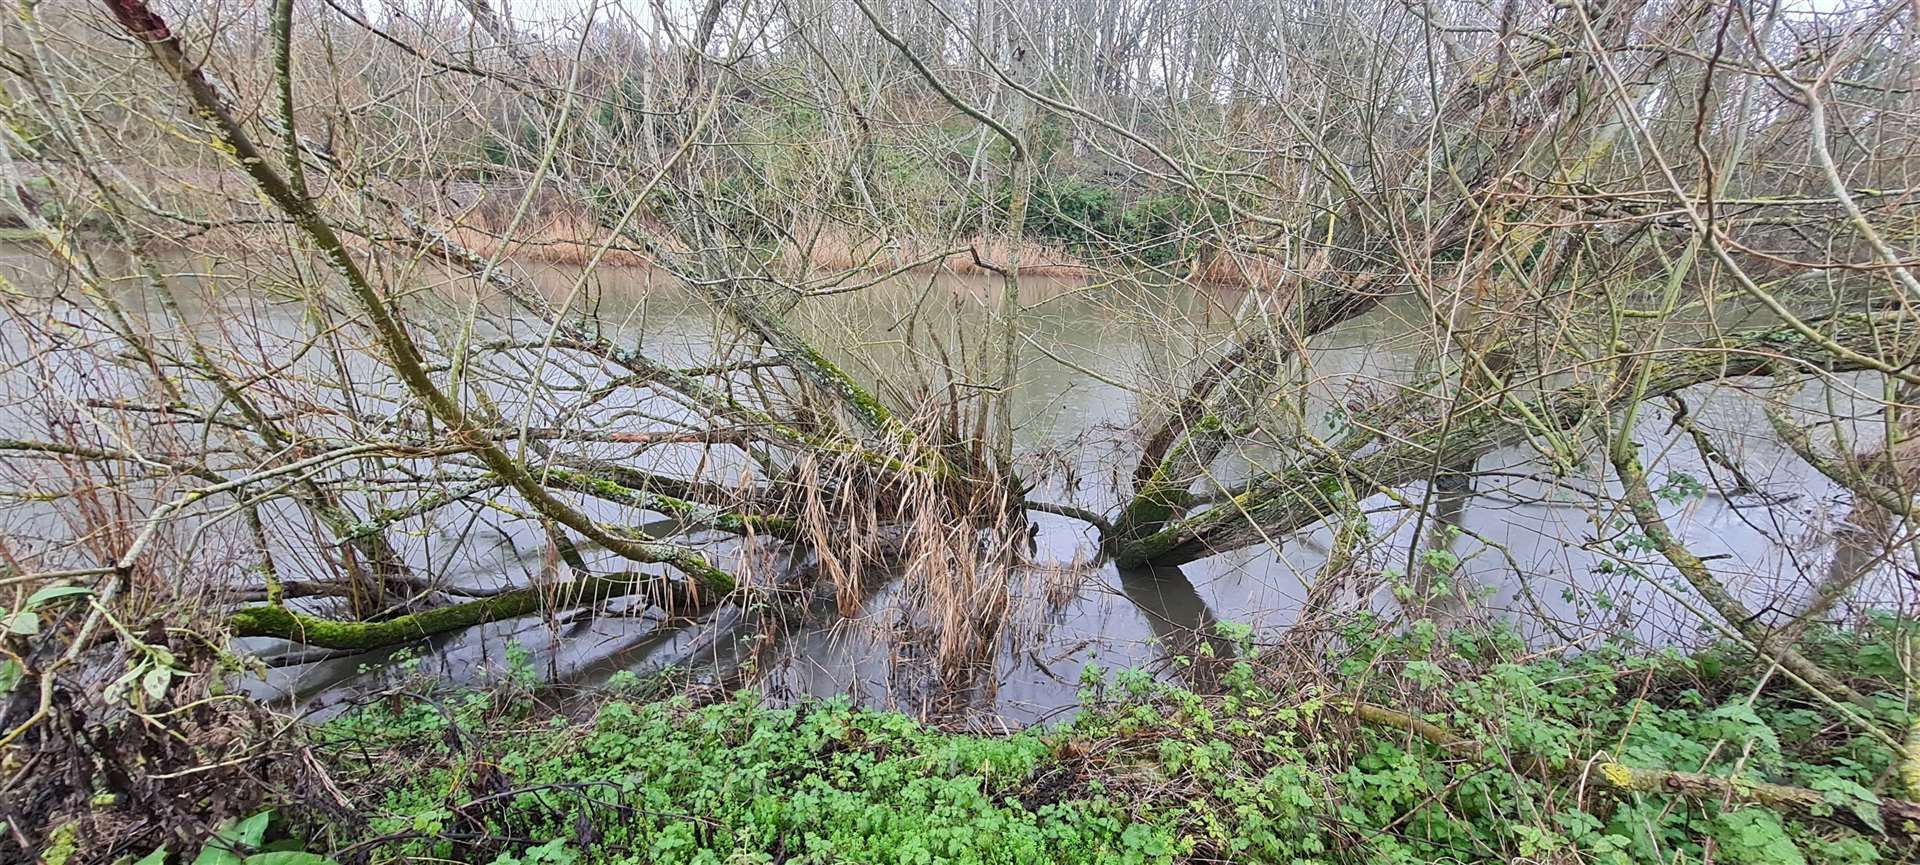 A fallen tree in the Great Stour this week